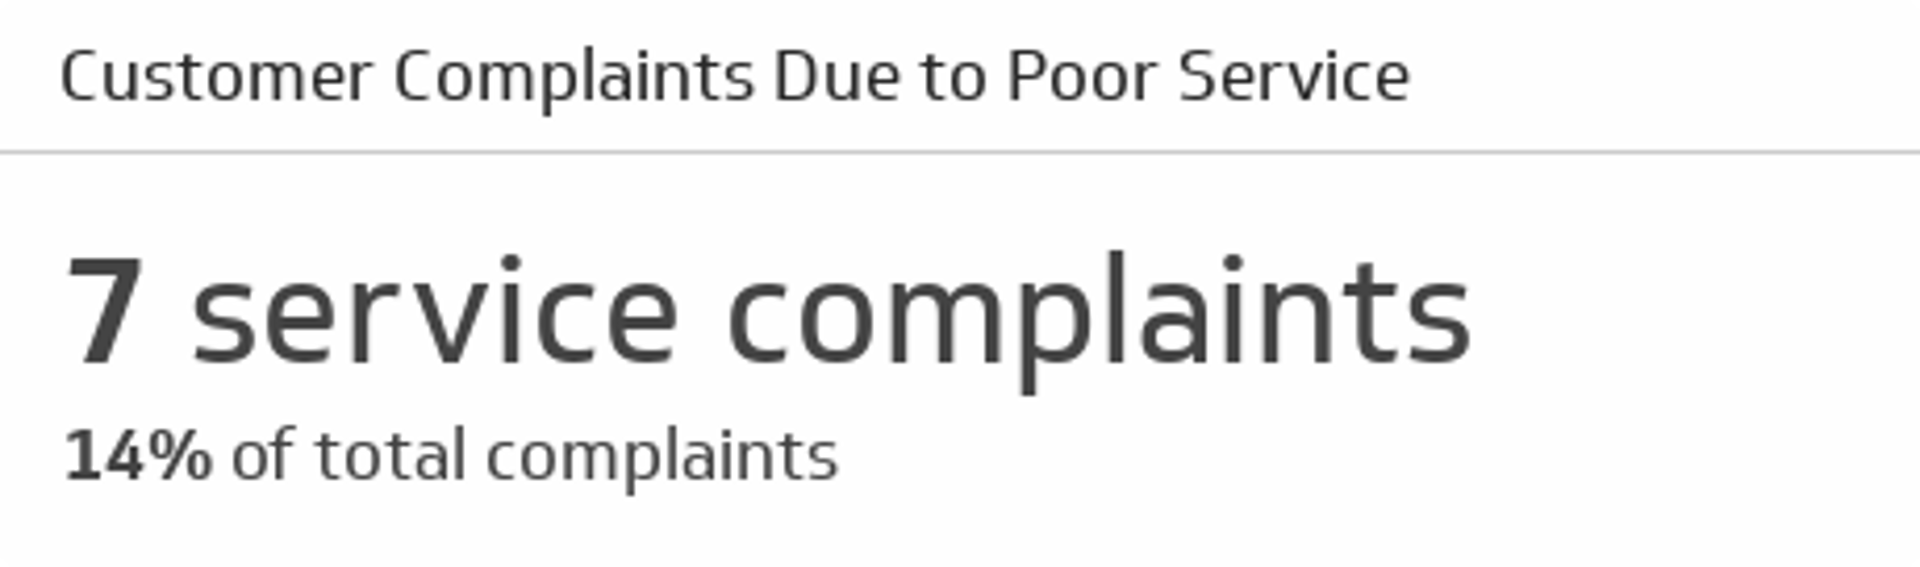 Support KPI Example - Customer Complaints Due to Poor Service or Product Quality Metric